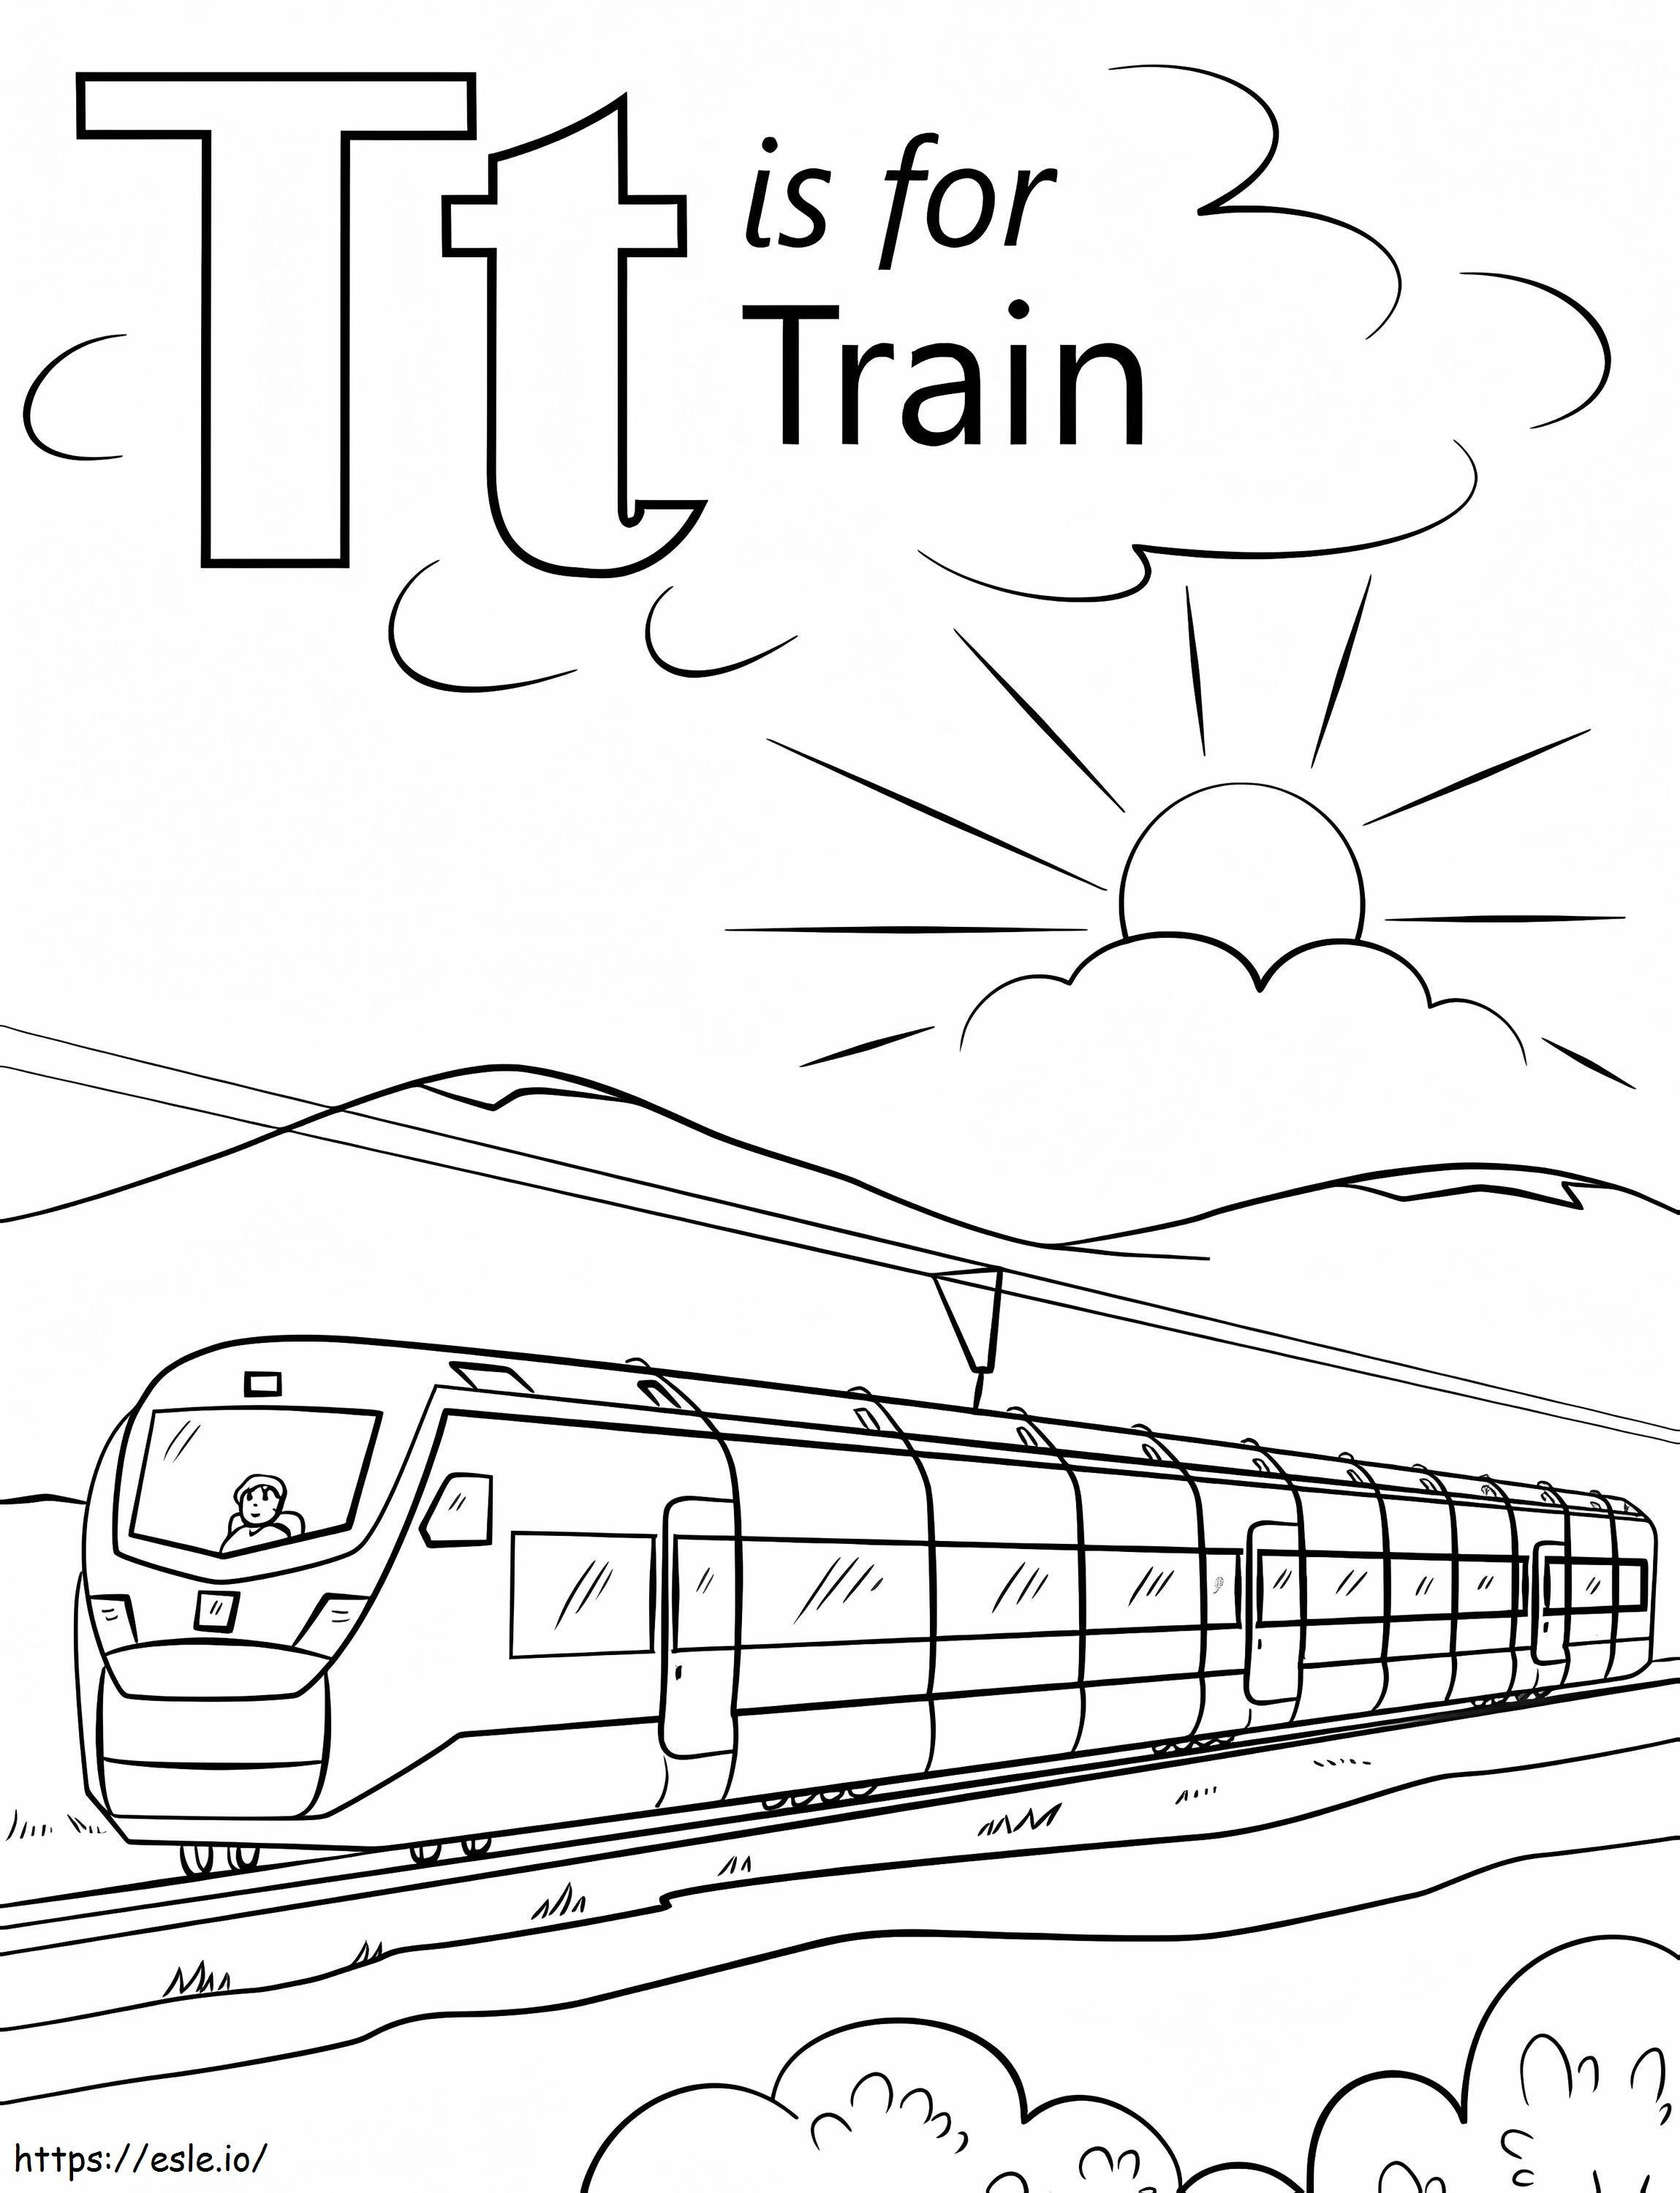 Train Letter T coloring page